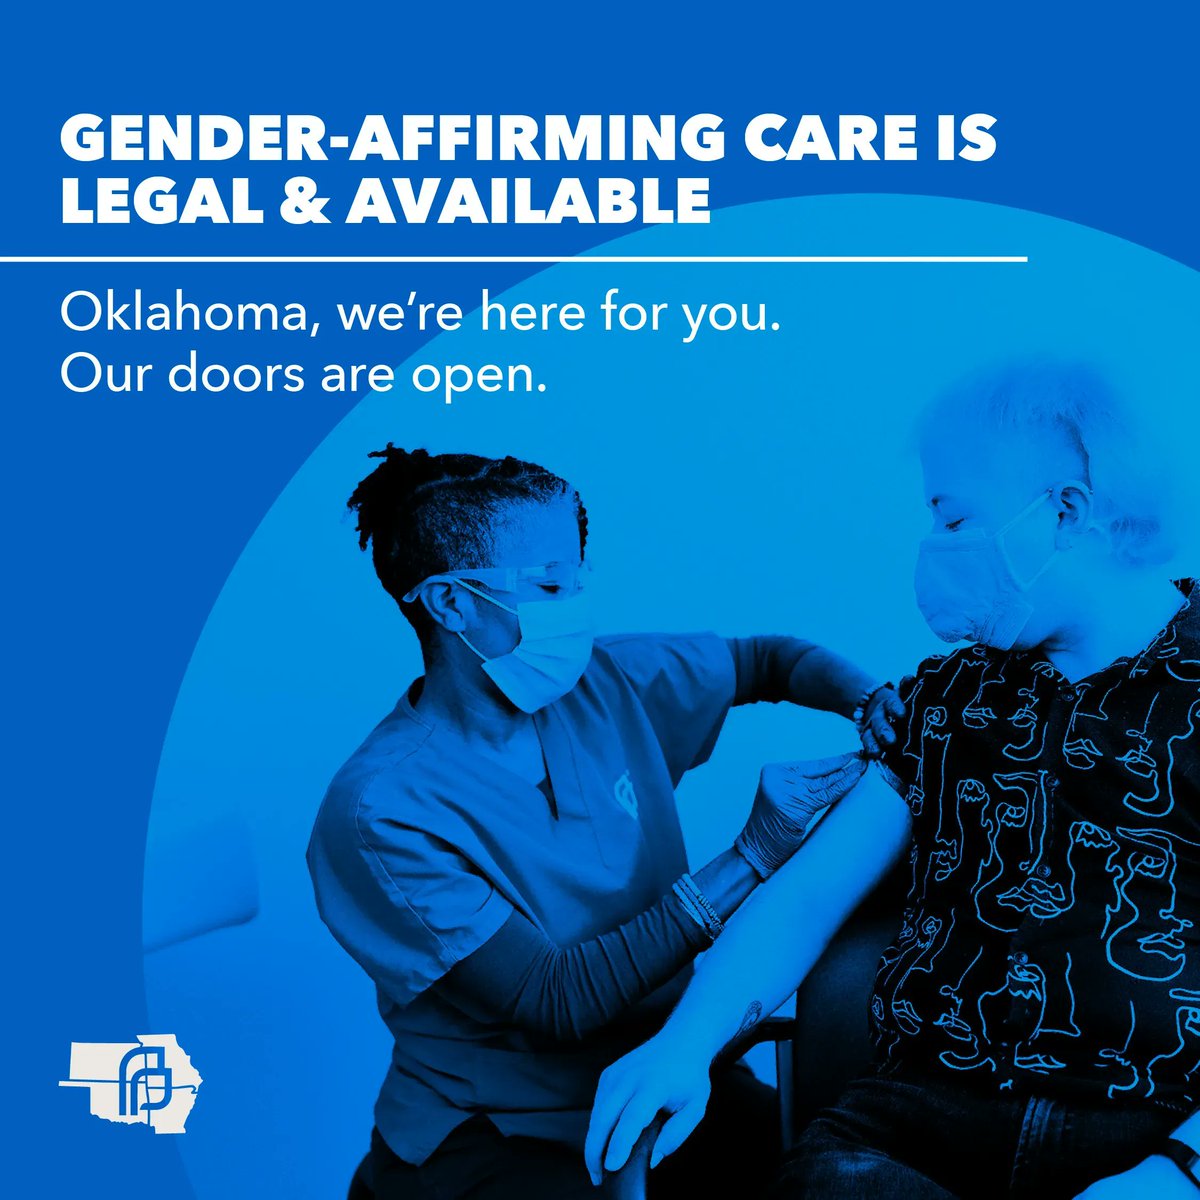 Gender-affirming care is legal and available in Oklahoma. We are monitoring legislation that could have a potential impact on care accessibility in the state and will update if there are any changes to services.